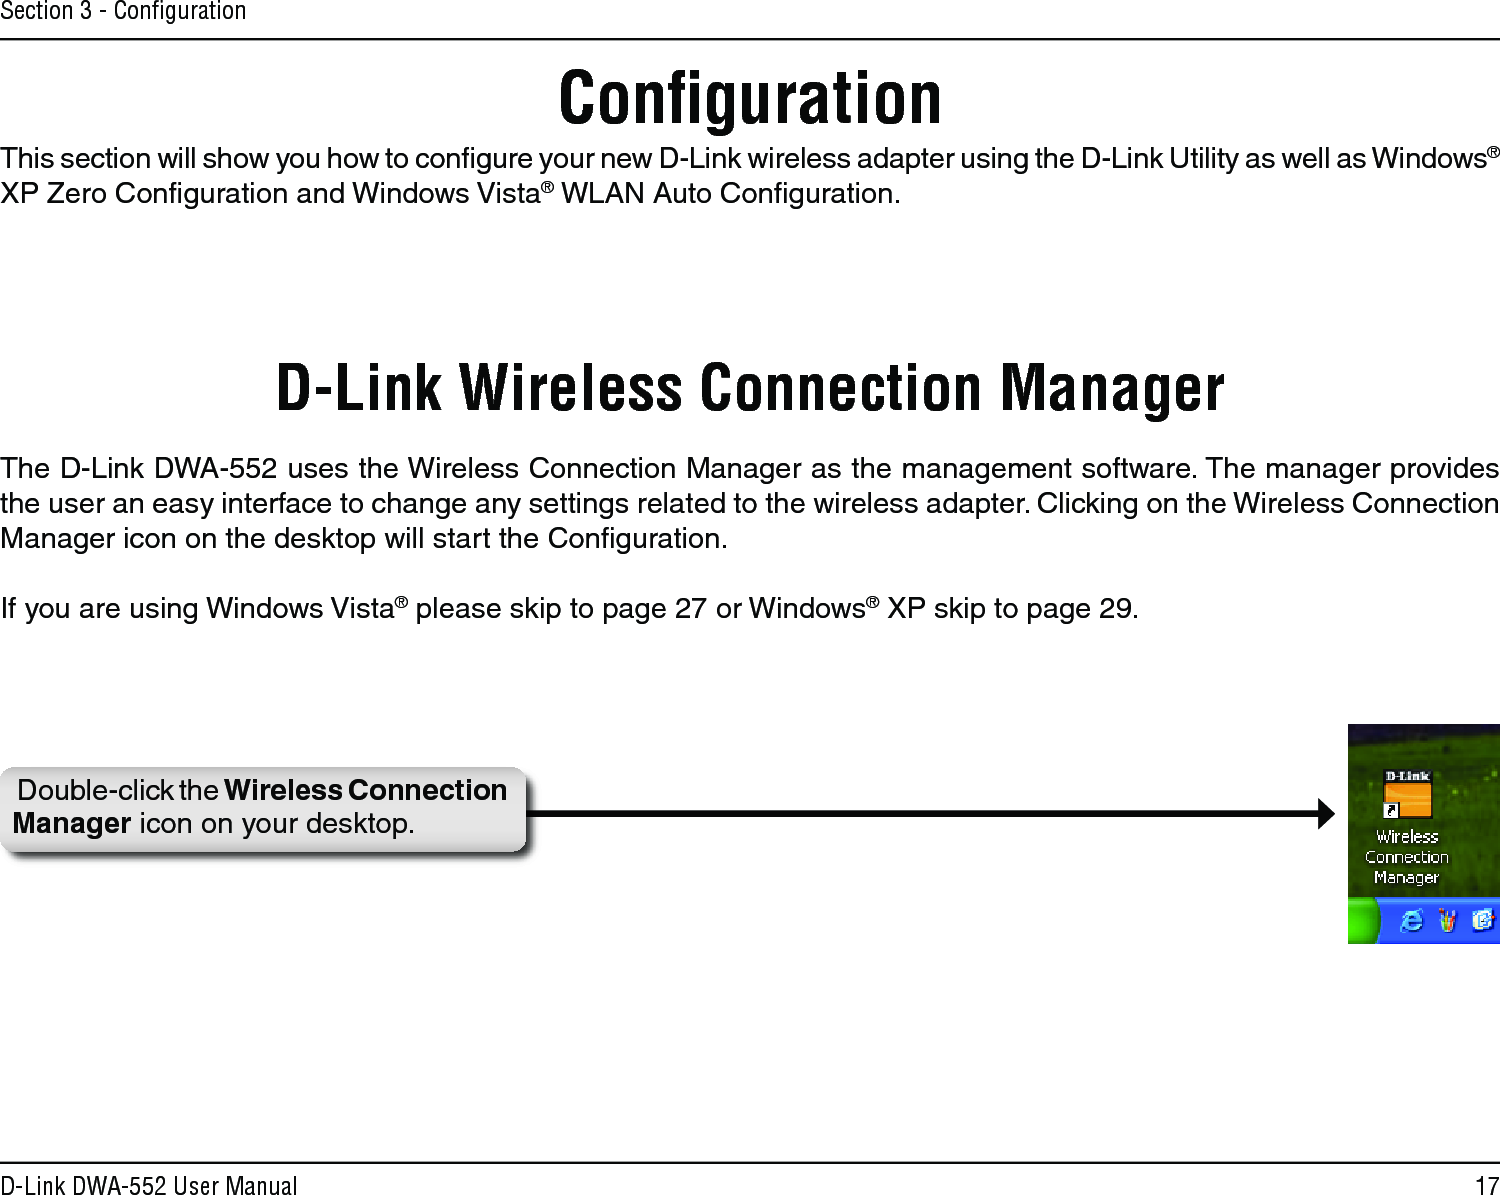 17D-Link DWA-552 User ManualSection 3 - ConﬁgurationConﬁgurationD-Link Wireless Connection ManagerDouble-click the Wireless Connection Manager icon on your desktop.This section will show you how to conﬁgure your new D-Link wireless adapter using the D-Link Utility as well as Windows® XP Zero Conﬁguration and Windows Vista® WLAN Auto Conﬁguration.The D-Link DWA-552 uses the Wireless Connection Manager as the management software. The manager provides the user an easy interface to change any settings related to the wireless adapter. Clicking on the Wireless Connection Manager icon on the desktop will start the Conﬁguration.If you are using Windows Vista® please skip to page 27 or Windows® XP skip to page 29.